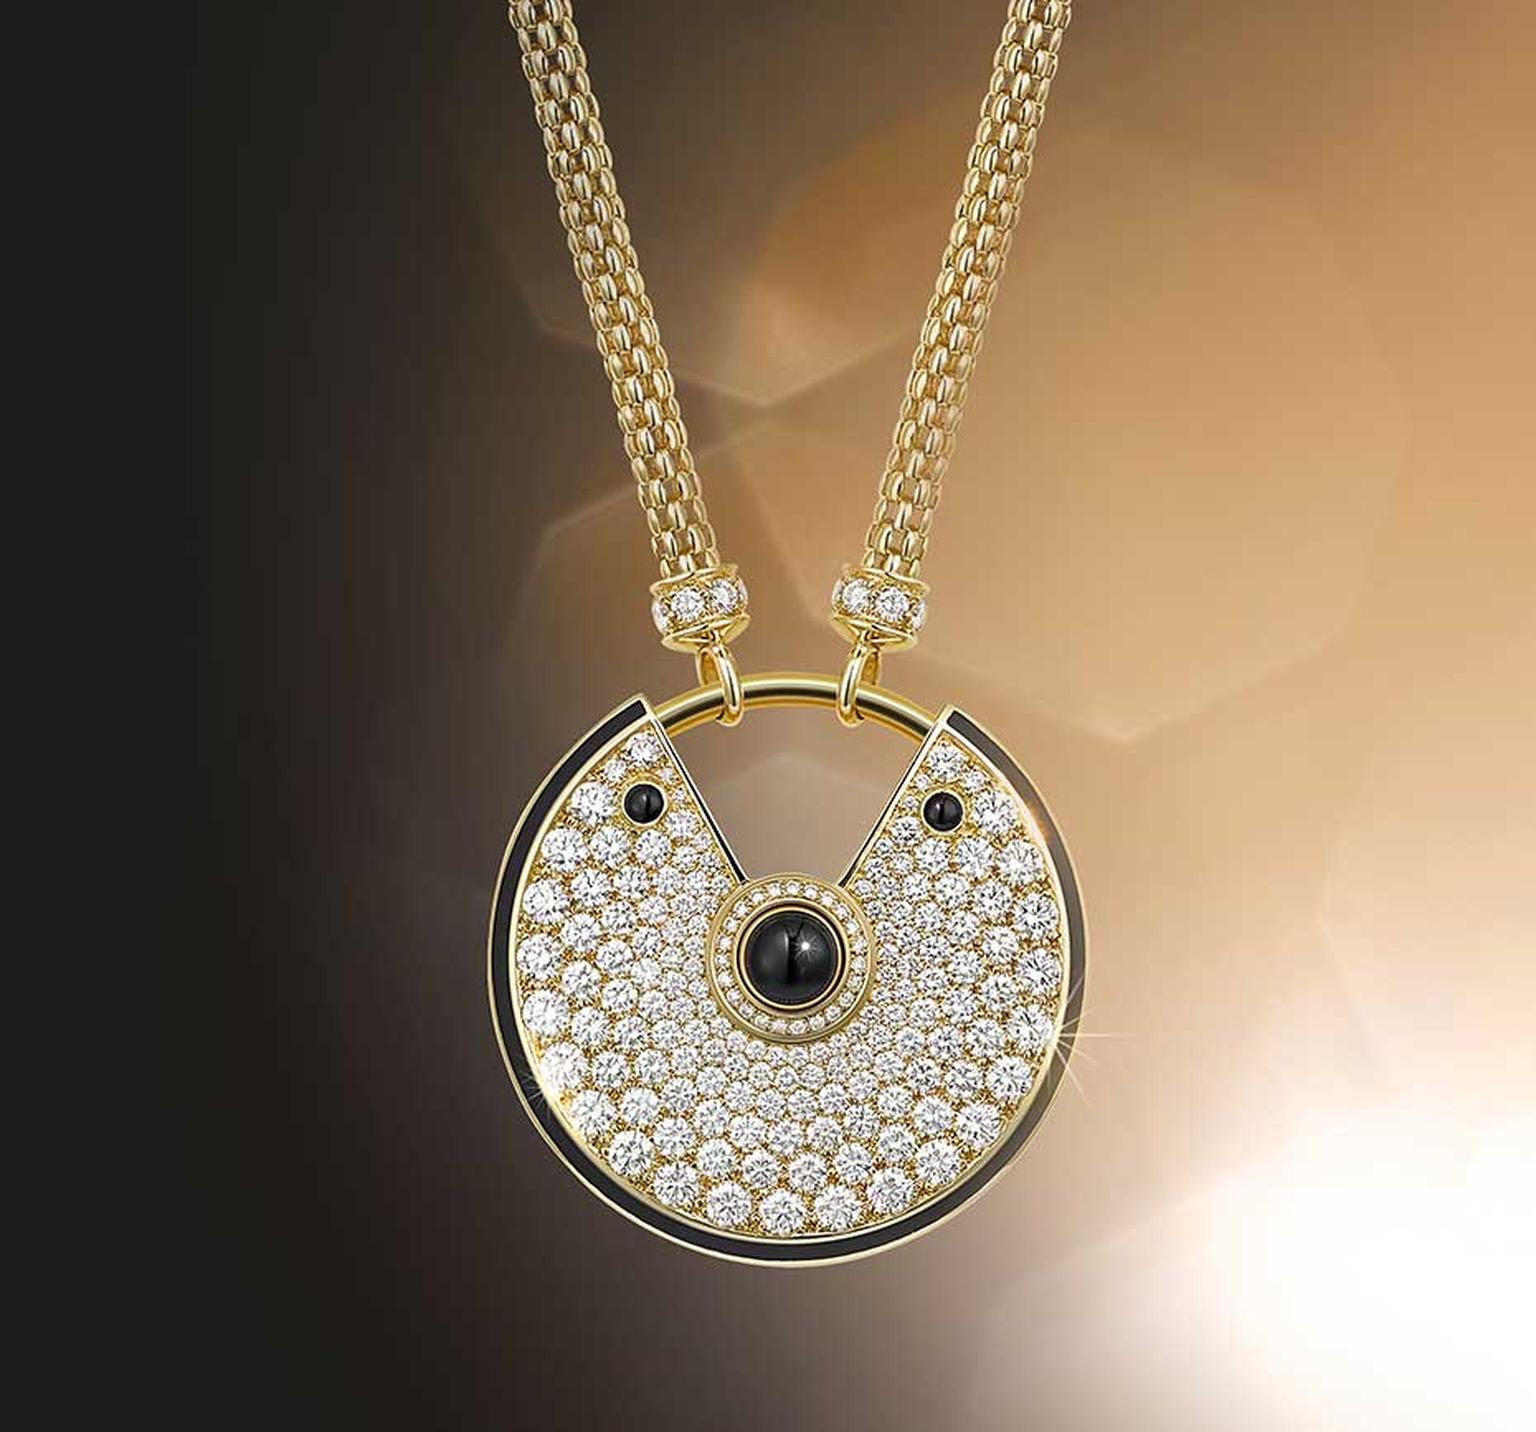 Amulette de Cartier large gold and black lacquer pendant with diamonds and three onyx cabochons